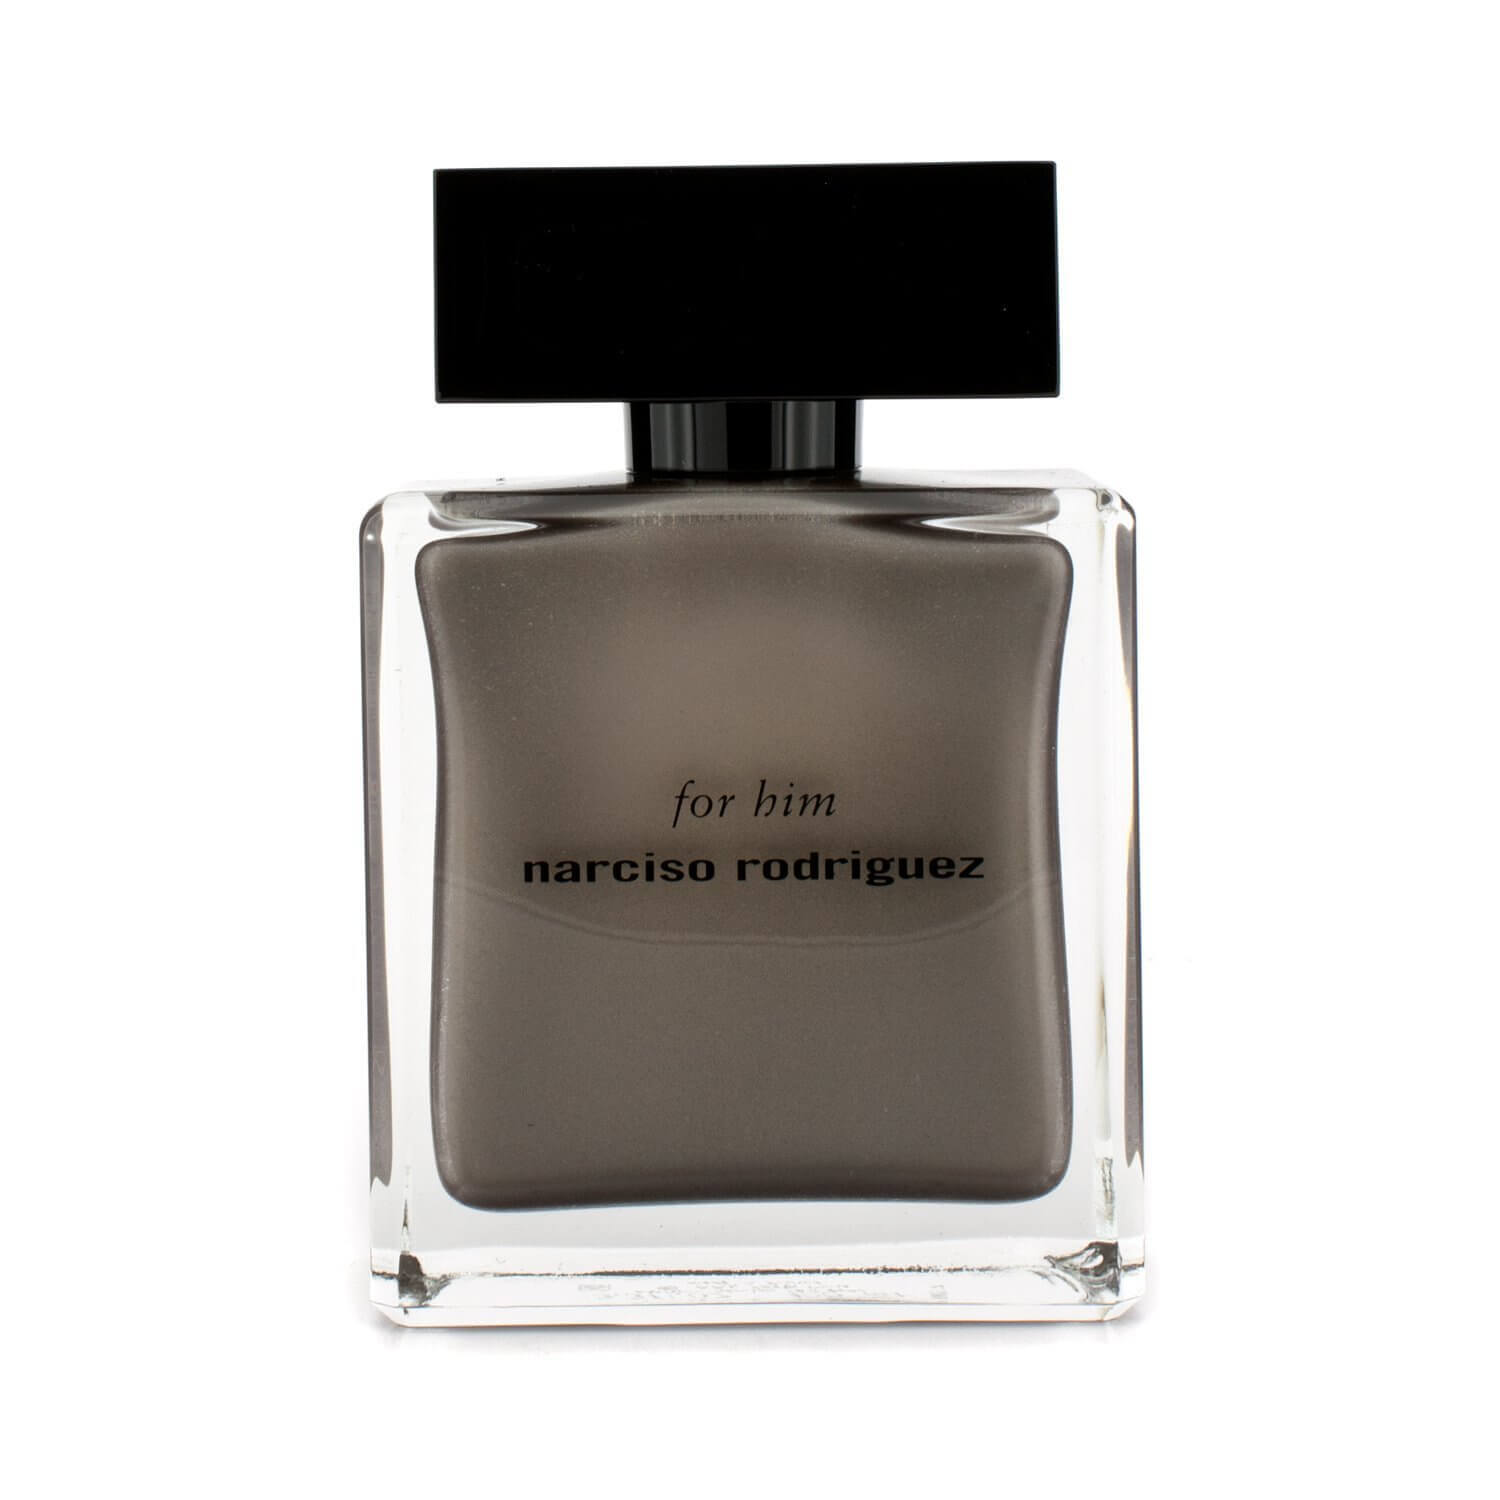 All of me narciso rodriguez. Narciso Rodriguez for him 100ml. Нарциссо Родригес Парфюм мужской. Коричневые нарциссо Родригез. Нарцисо Родригез золотые.